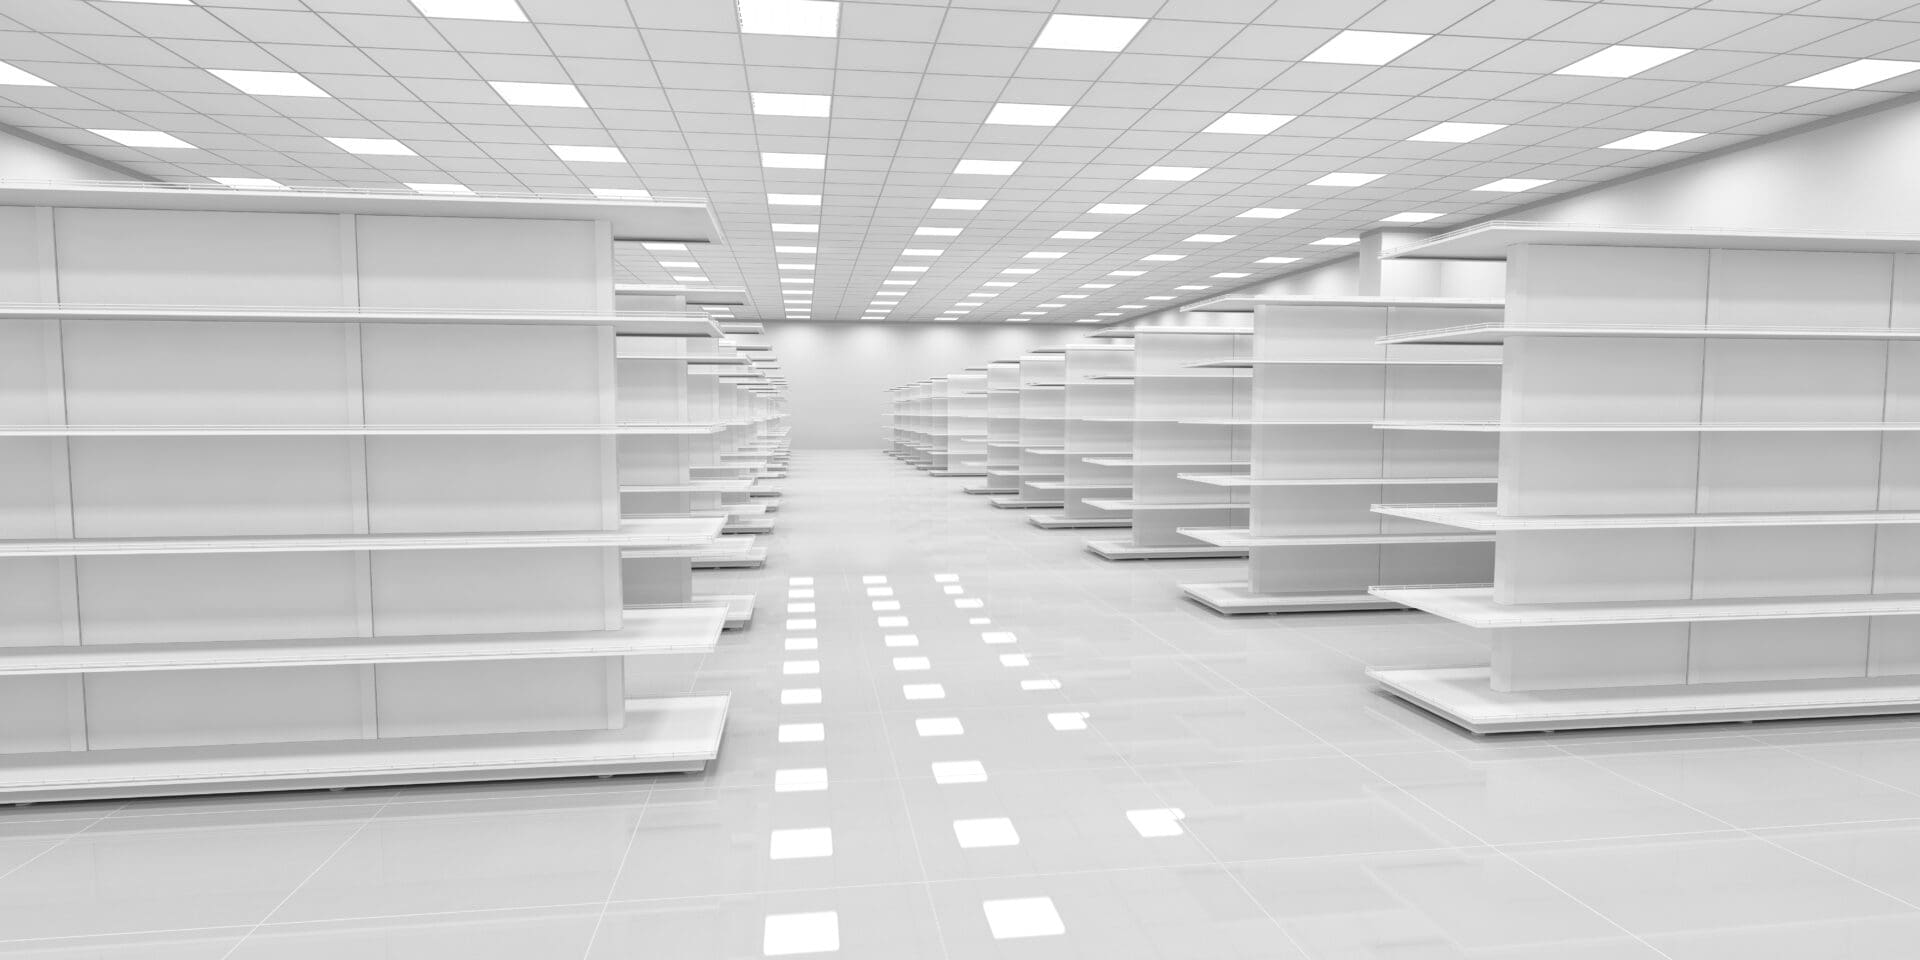 A large white room with many shelves in it